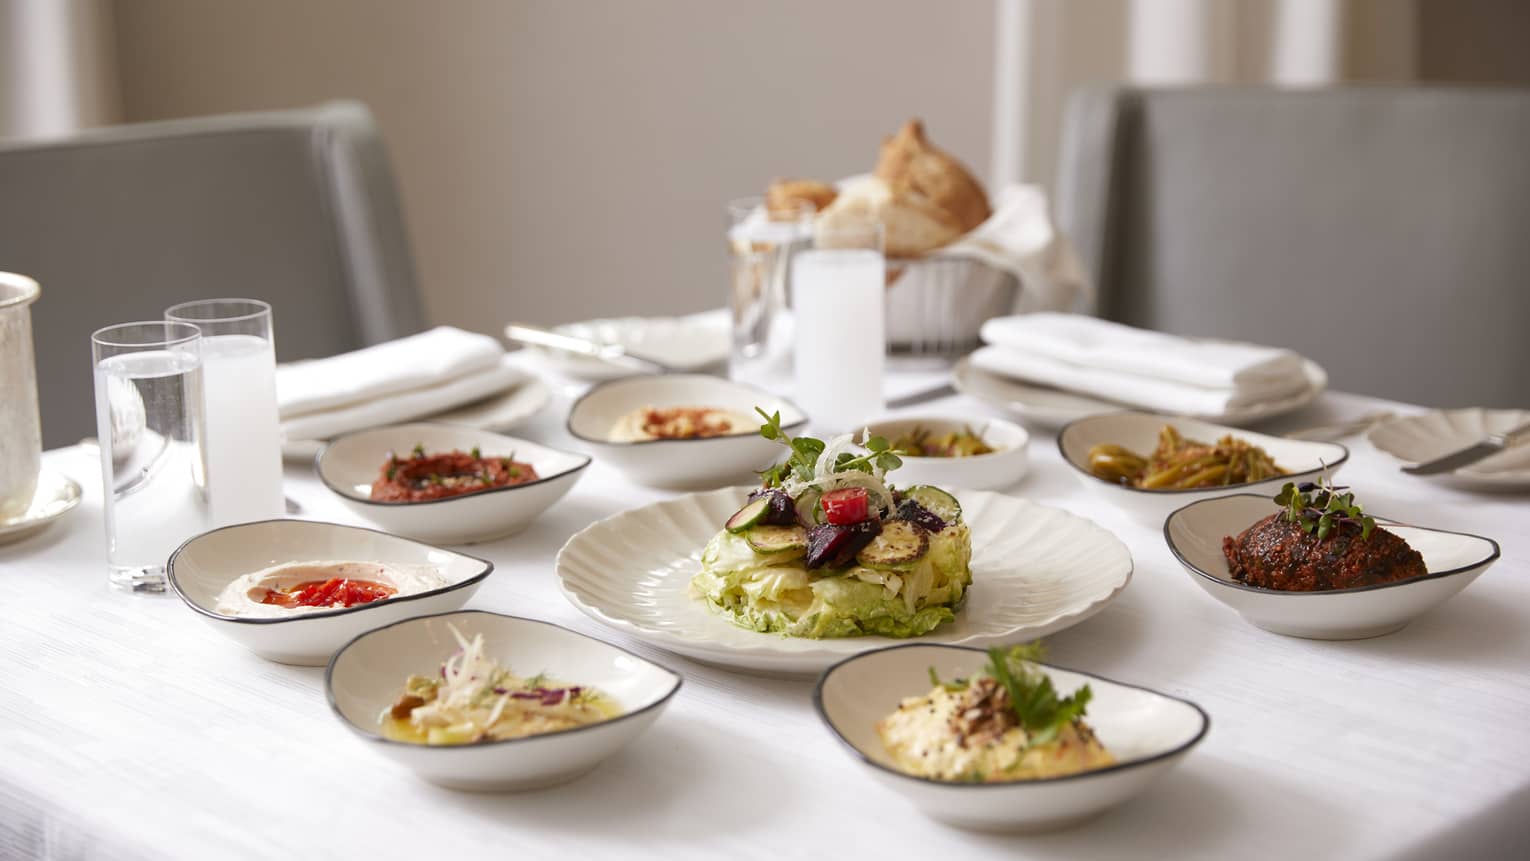 Small white dishes with lunch items, meats, breads, sauces on dining table